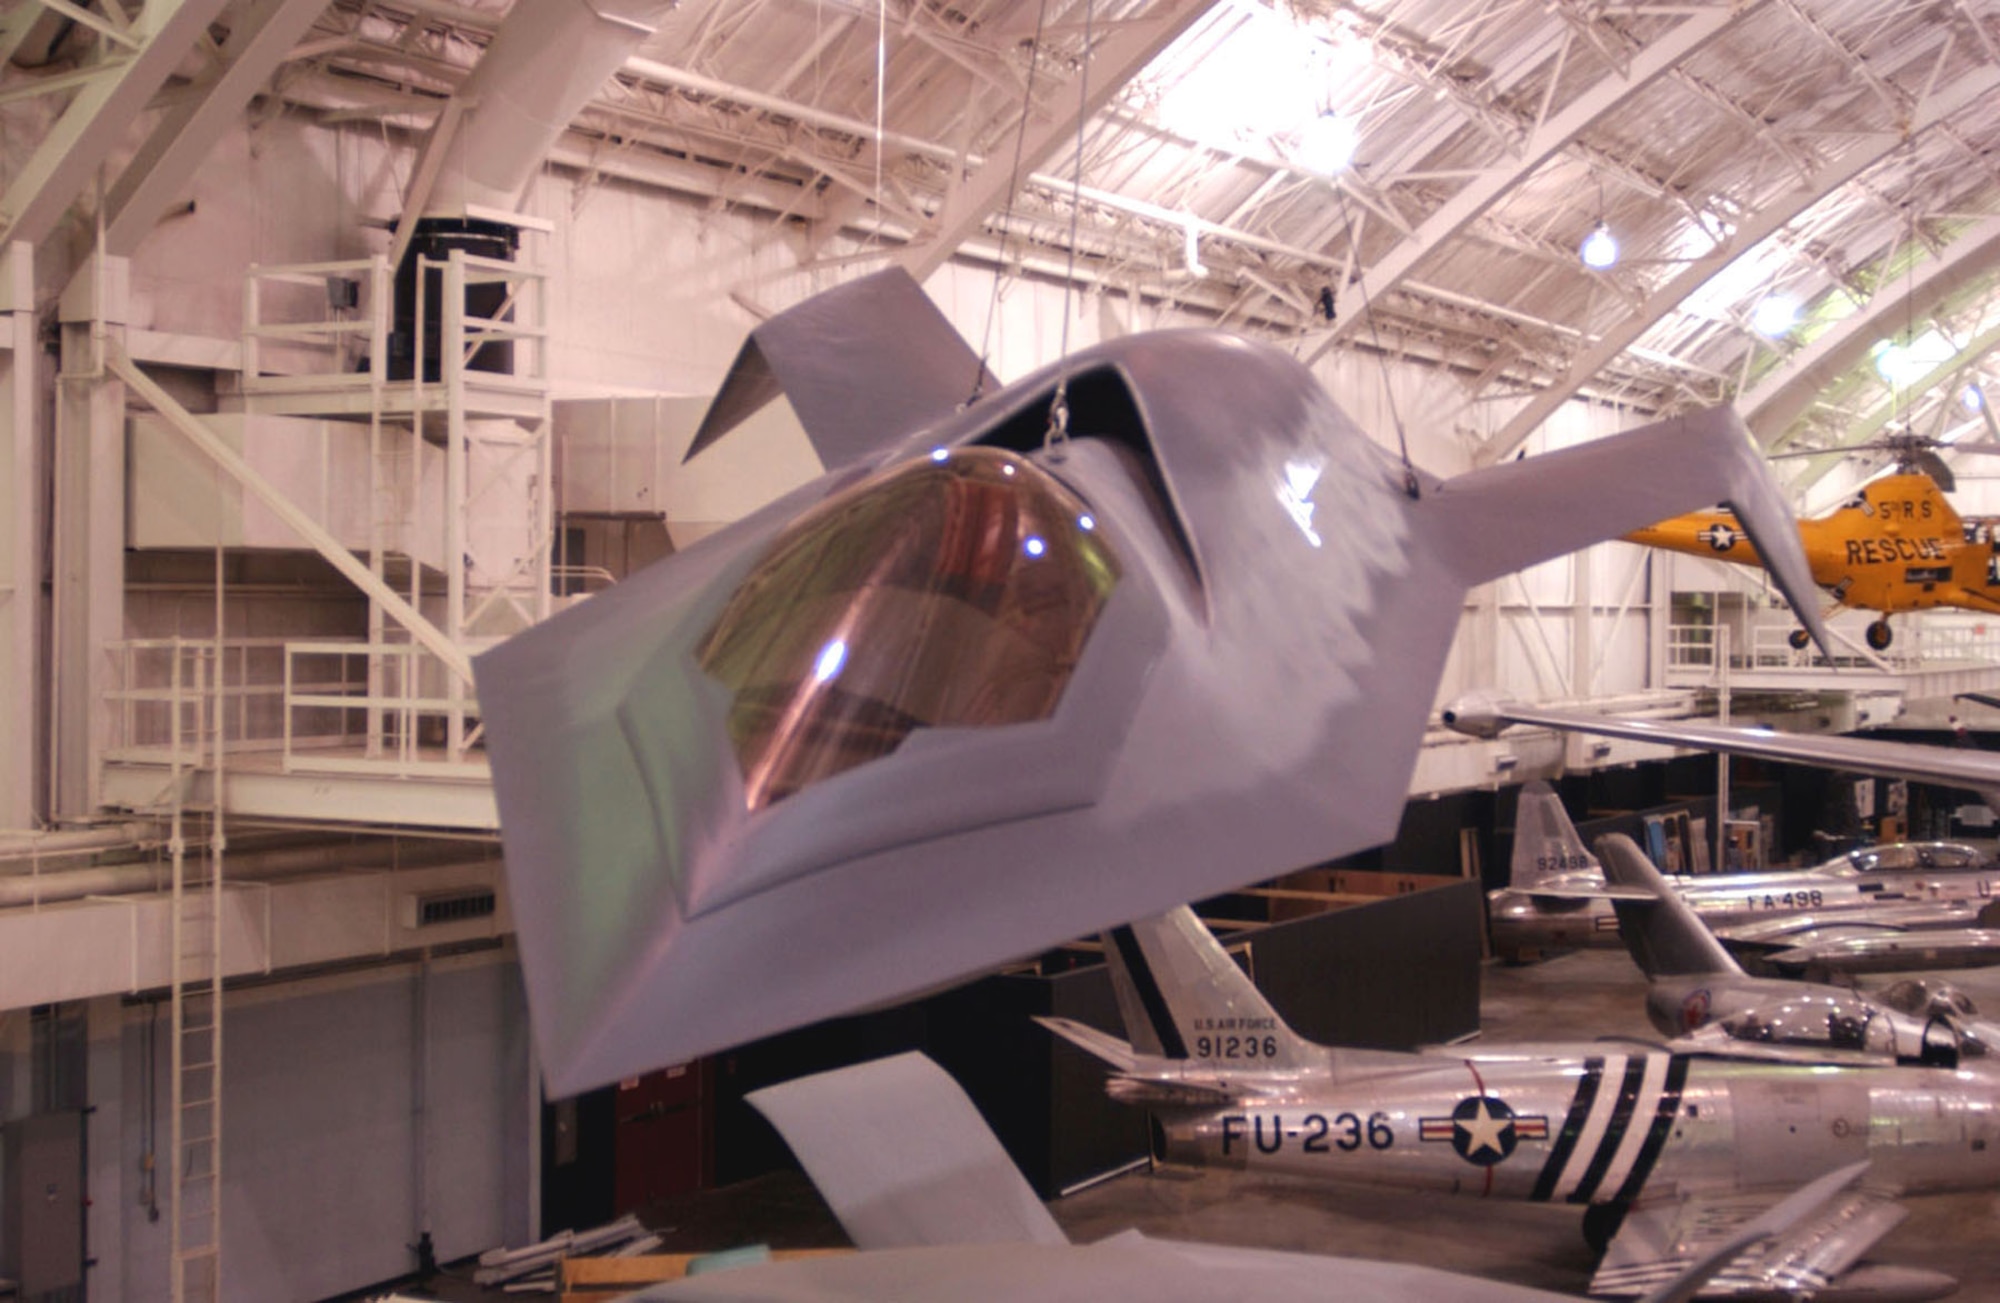 DAYTON, Ohio -- Boeing Bird of Prey at the National Museum of the United States Air Force. (U.S. Air Force photo)